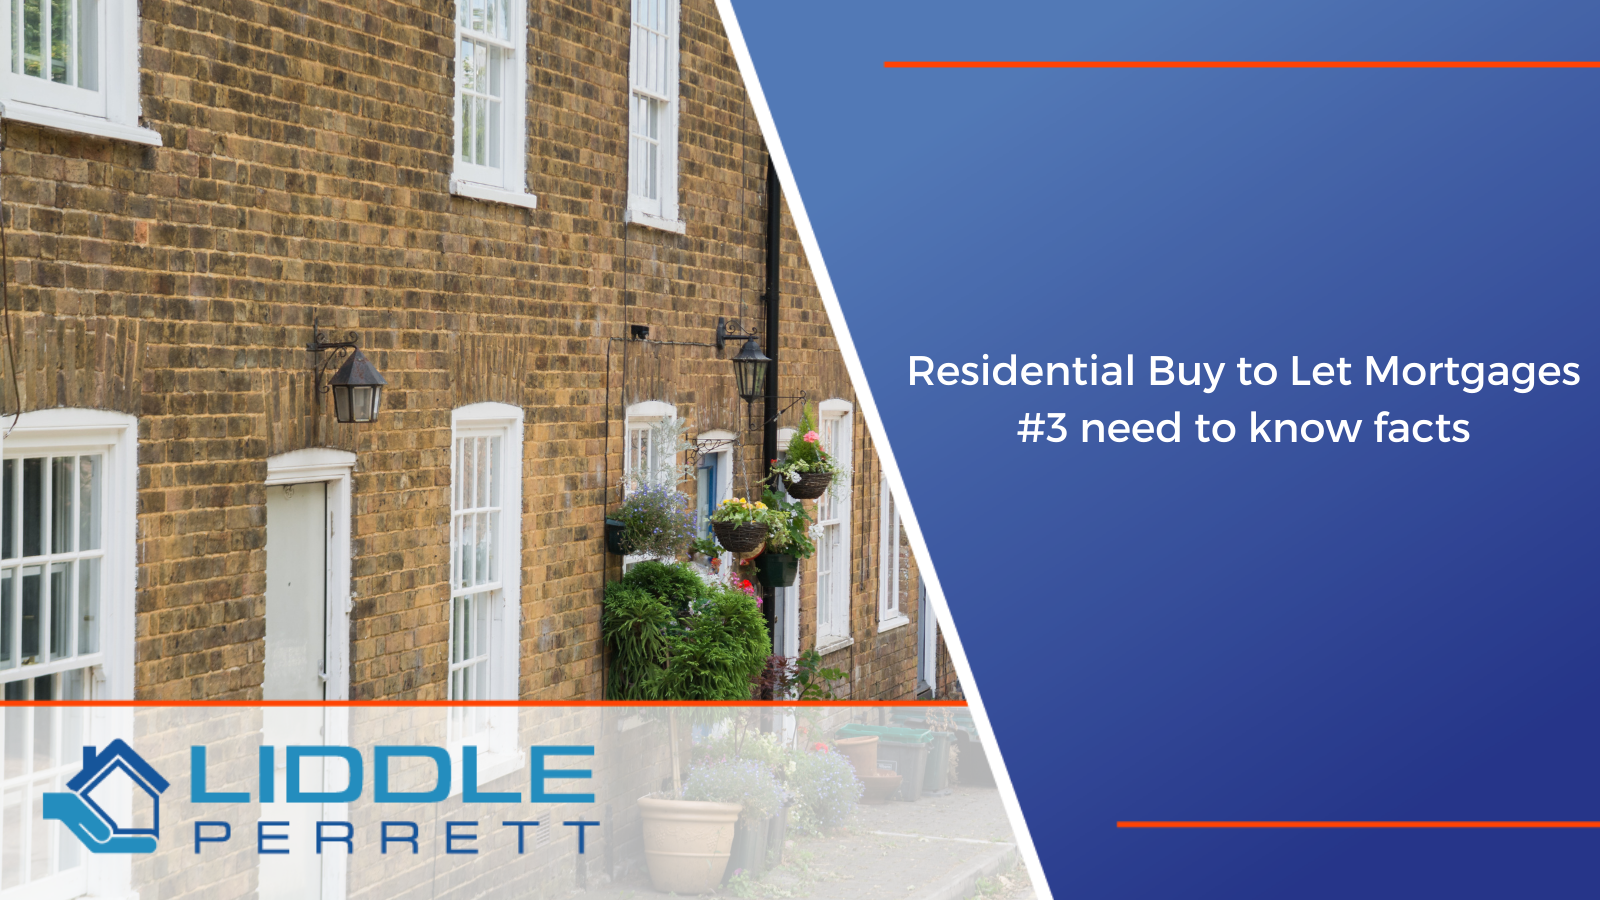 Residential Buy to Let Mortgages